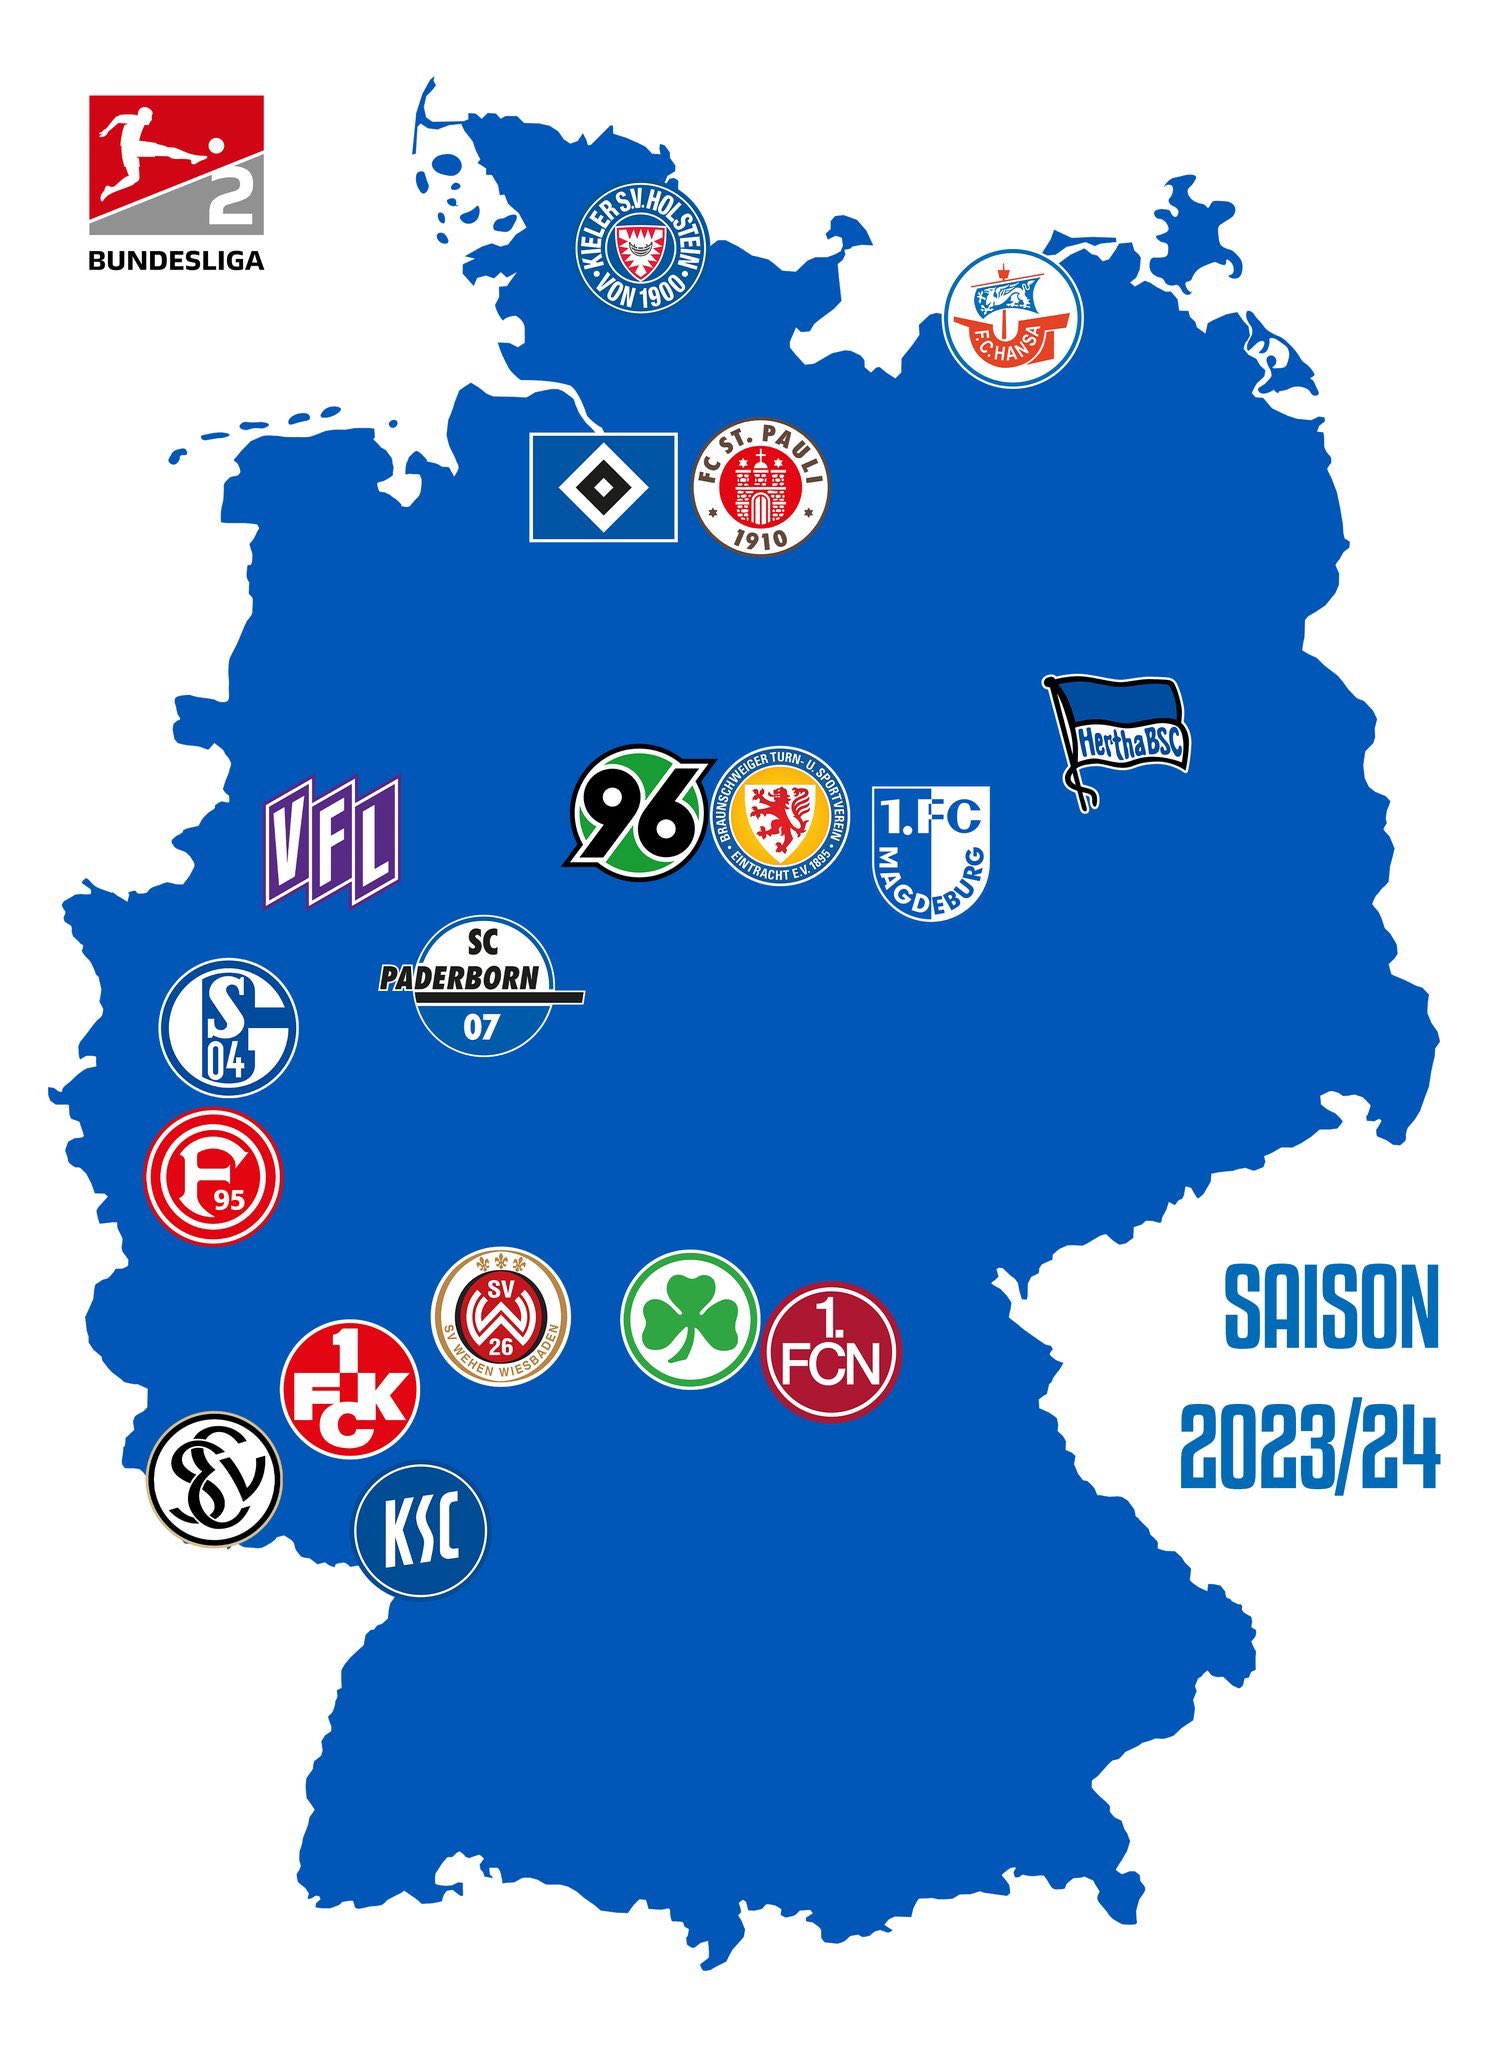 Danny Last on X: Bundesliga 2 map for 2023/24. Yes, as always, to football  maps.  / X